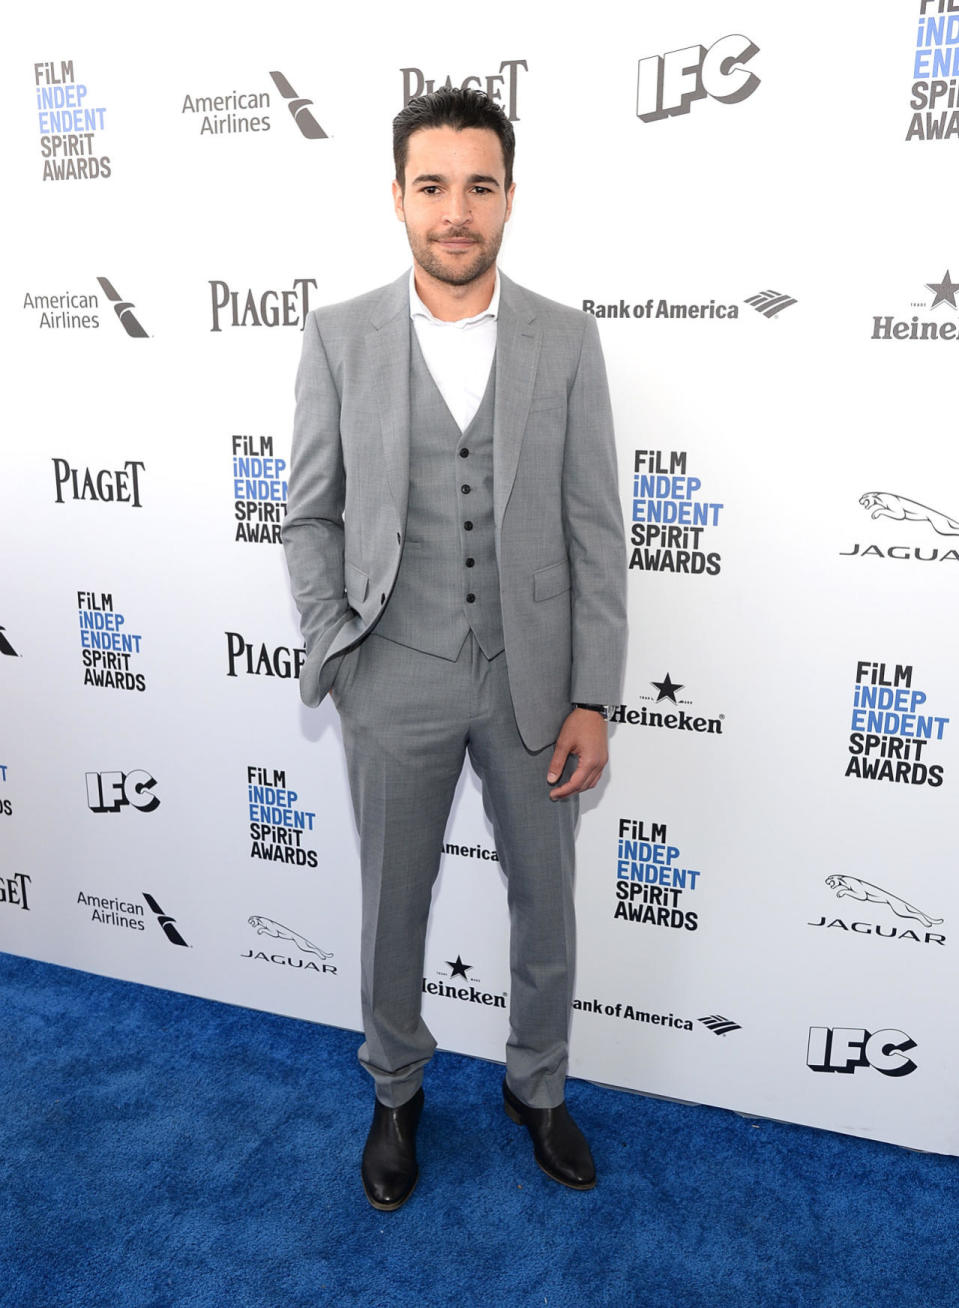 Christopher Abbott in a gray three-piece suit (sans tie) at the 2016 Film Independent Spirit Awards on February 27, 2016 in Santa Monica, California.